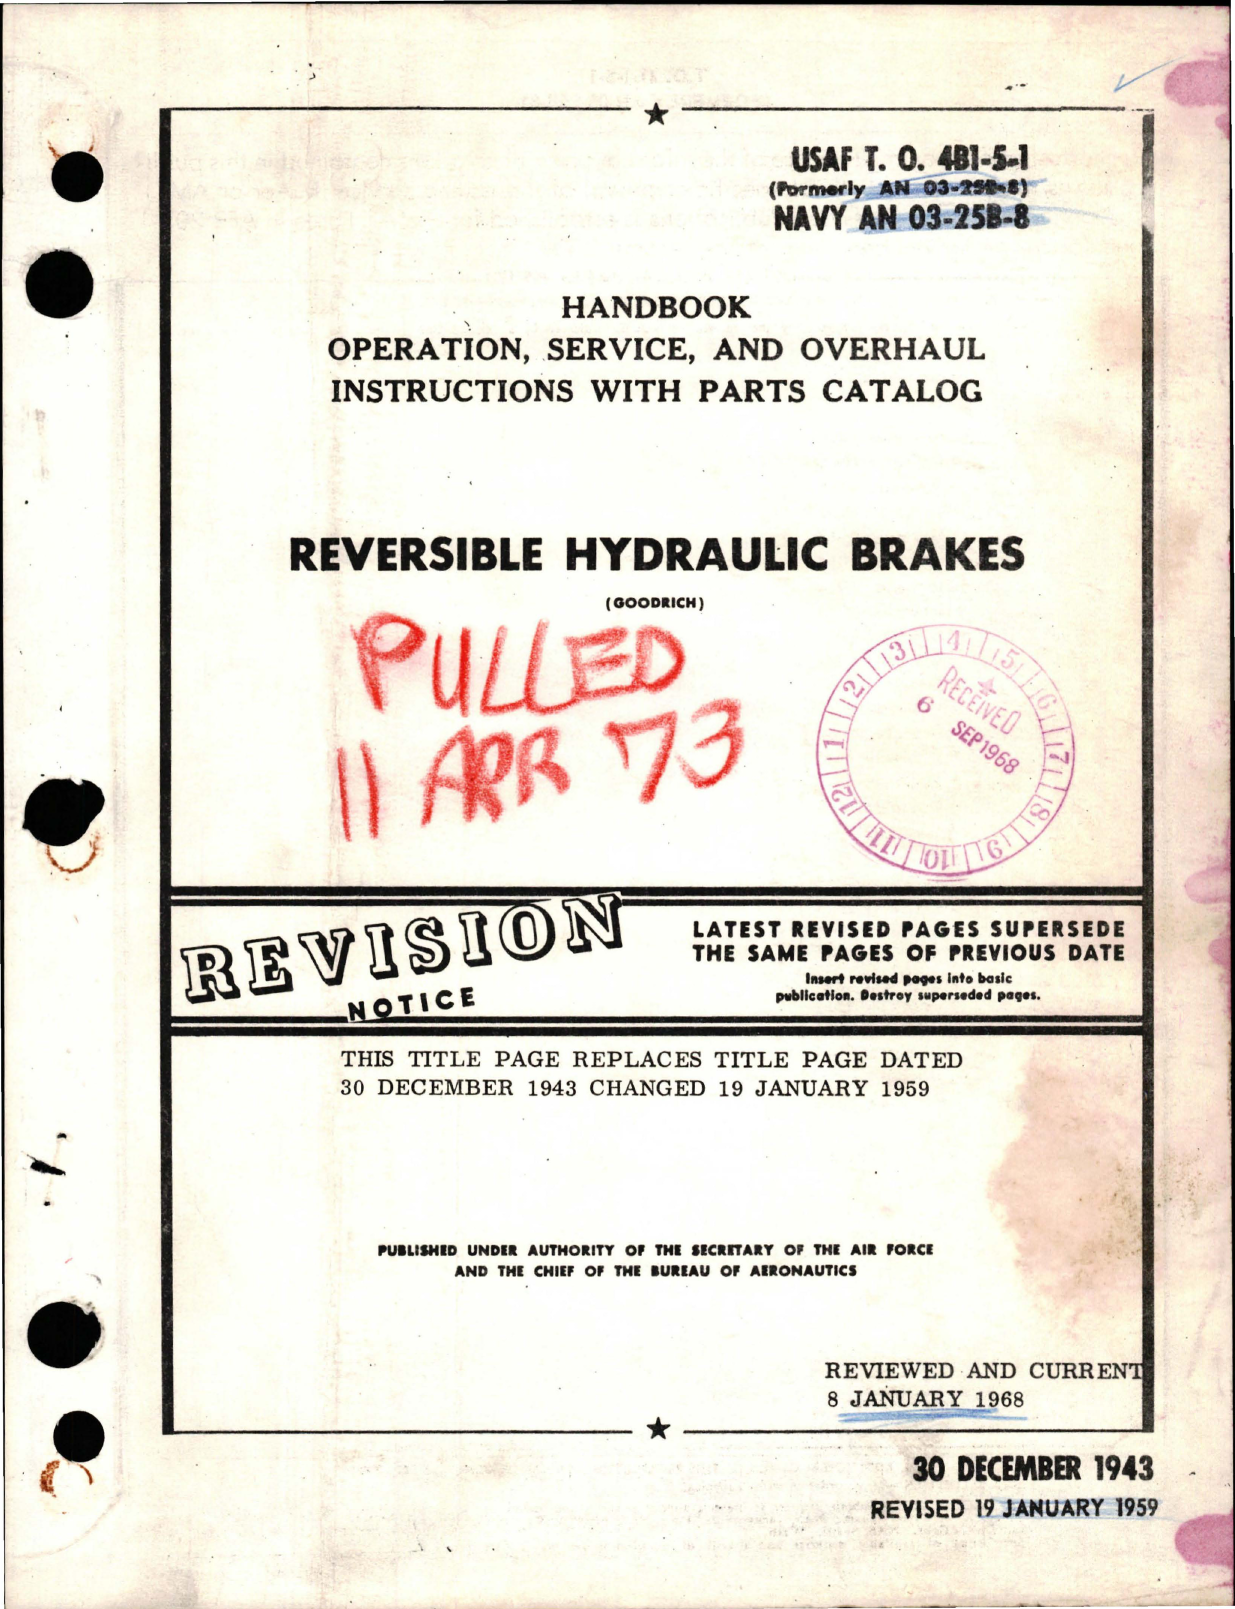 Sample page 1 from AirCorps Library document: Operation, Service, Overhaul Instructions with Parts Catalog for Reversible Hydraulic Brakes